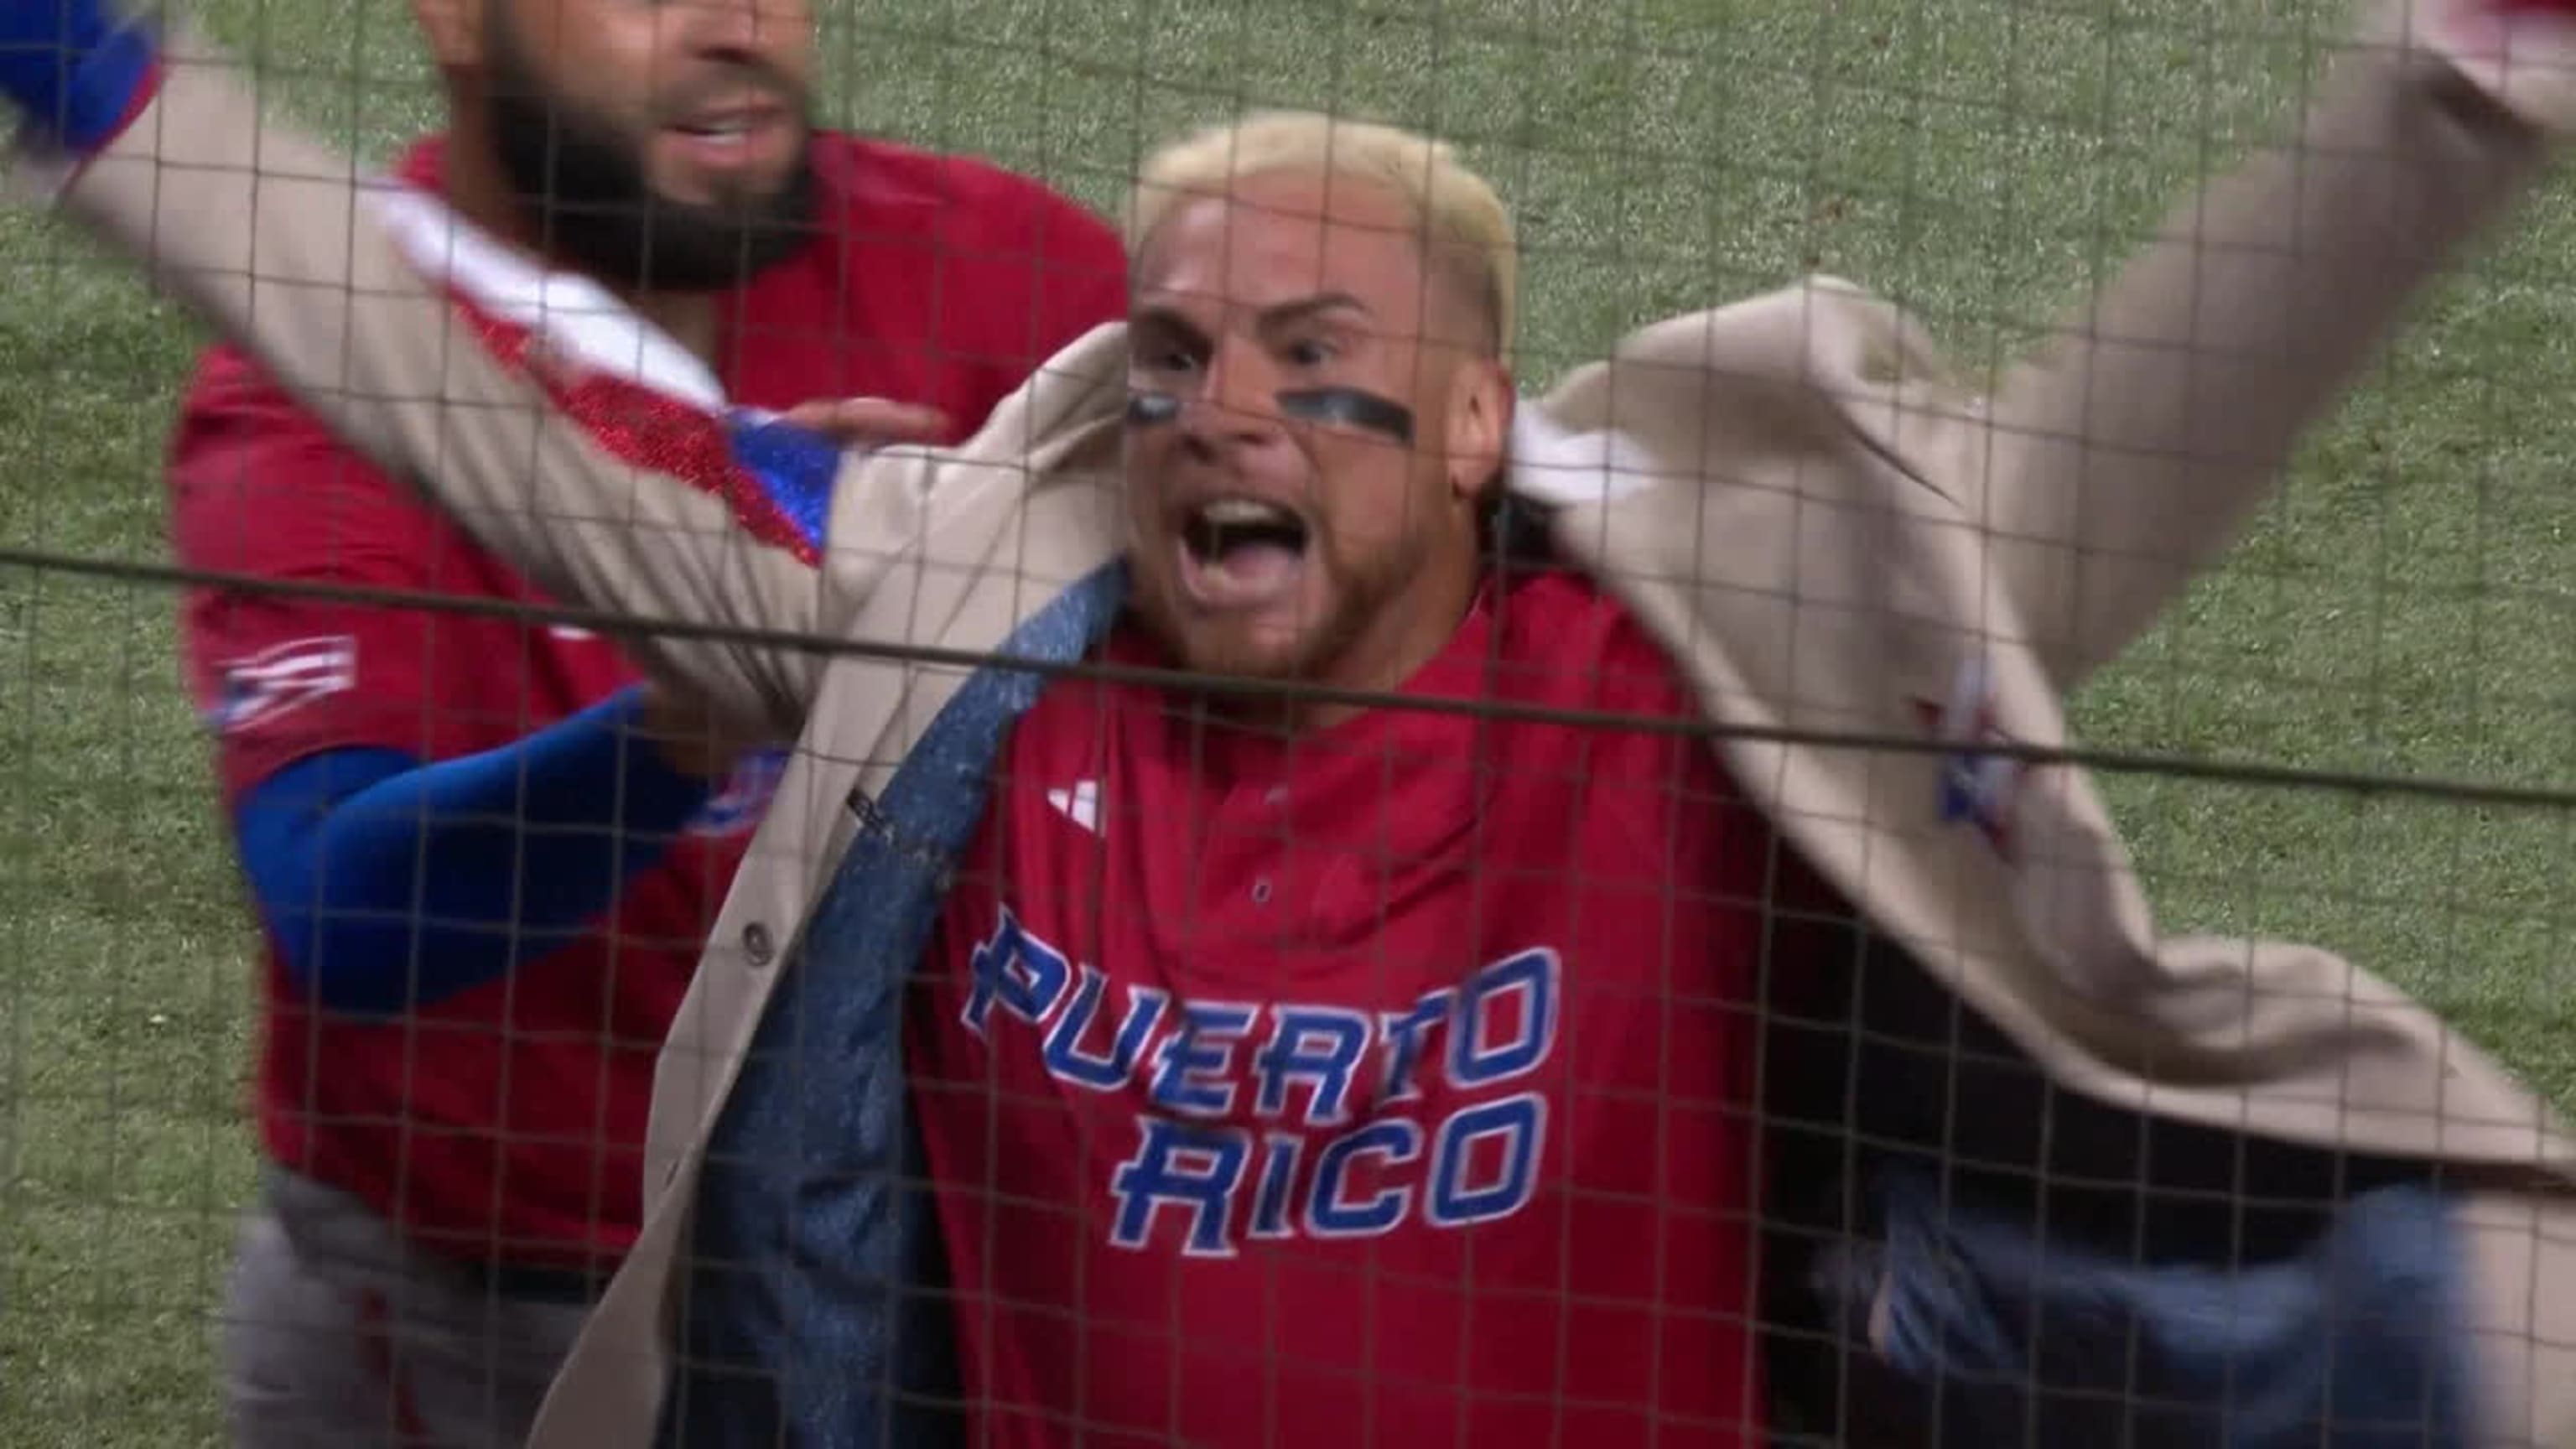 Puerto Rico upsets Dominican Republic in WBC and has blast doing so